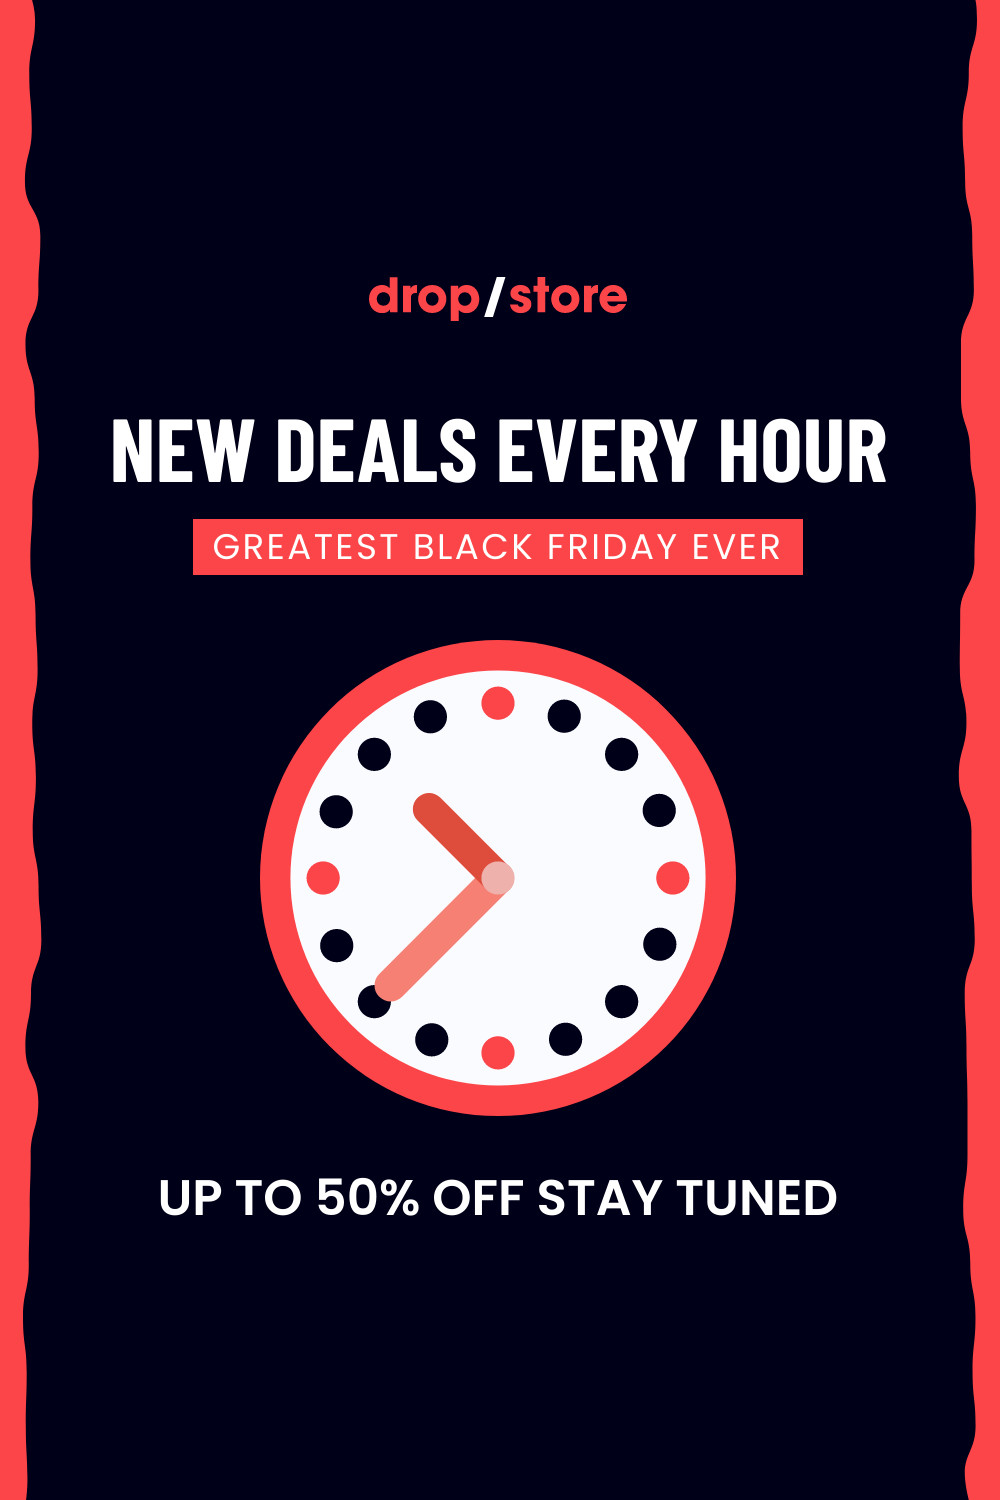 Black Friday New Deals Every Hour Facebook Cover 820x360